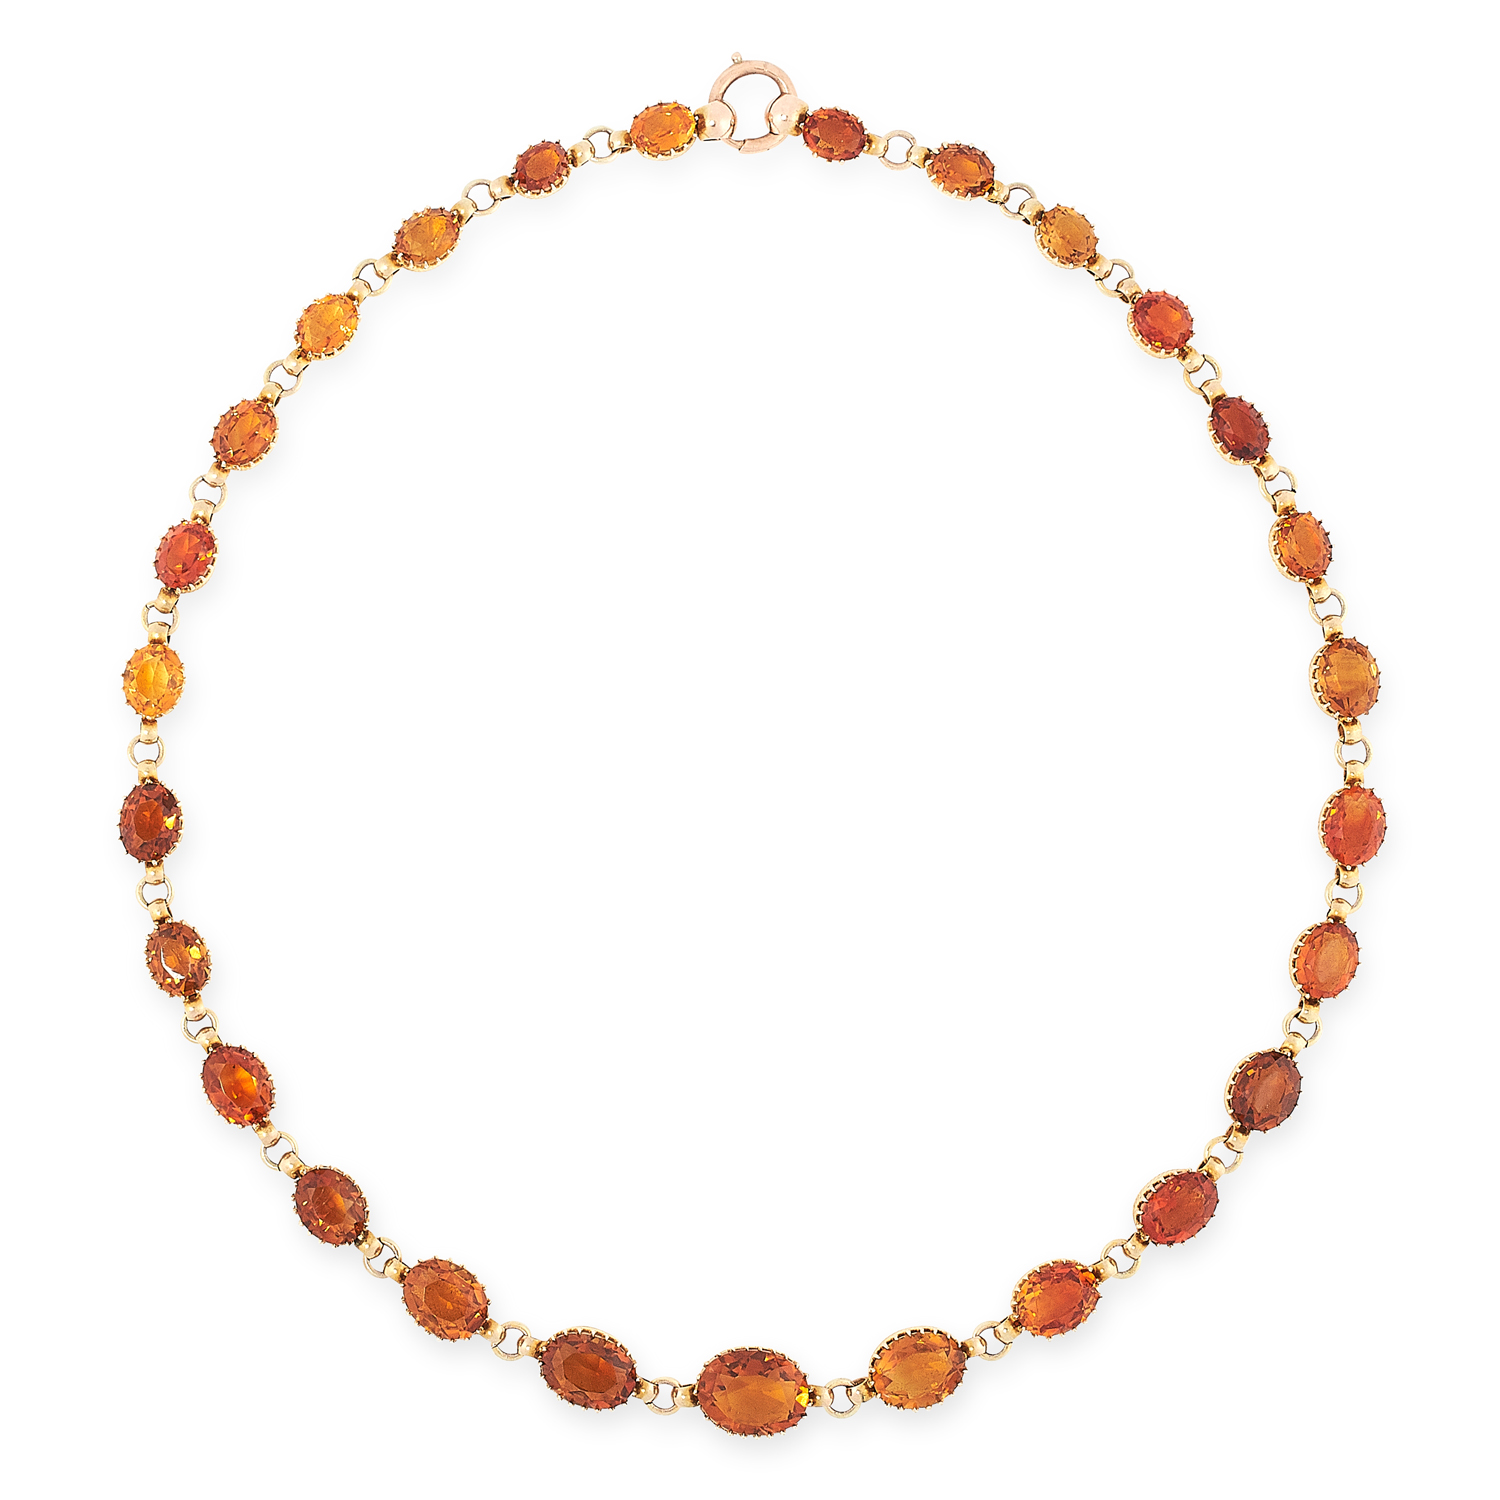 AN ANTIQUE CITRINE RIVIERE NECKLACE in yellow gold, comprising a row of twenty-seven graduated